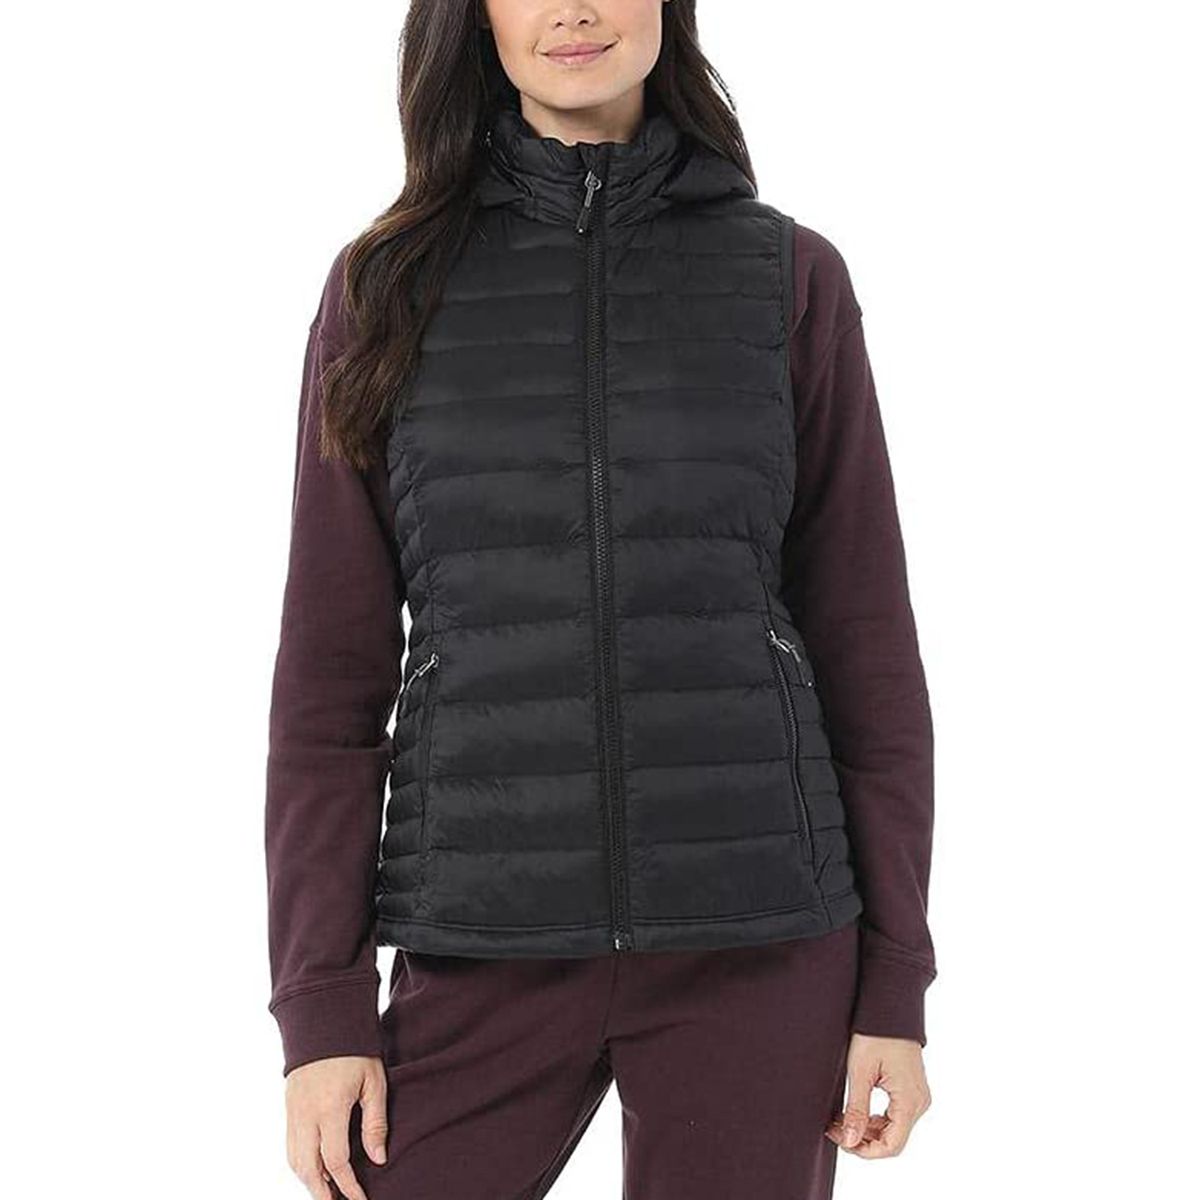 Oprah Loves This Packable Puffer Vest With a Hood